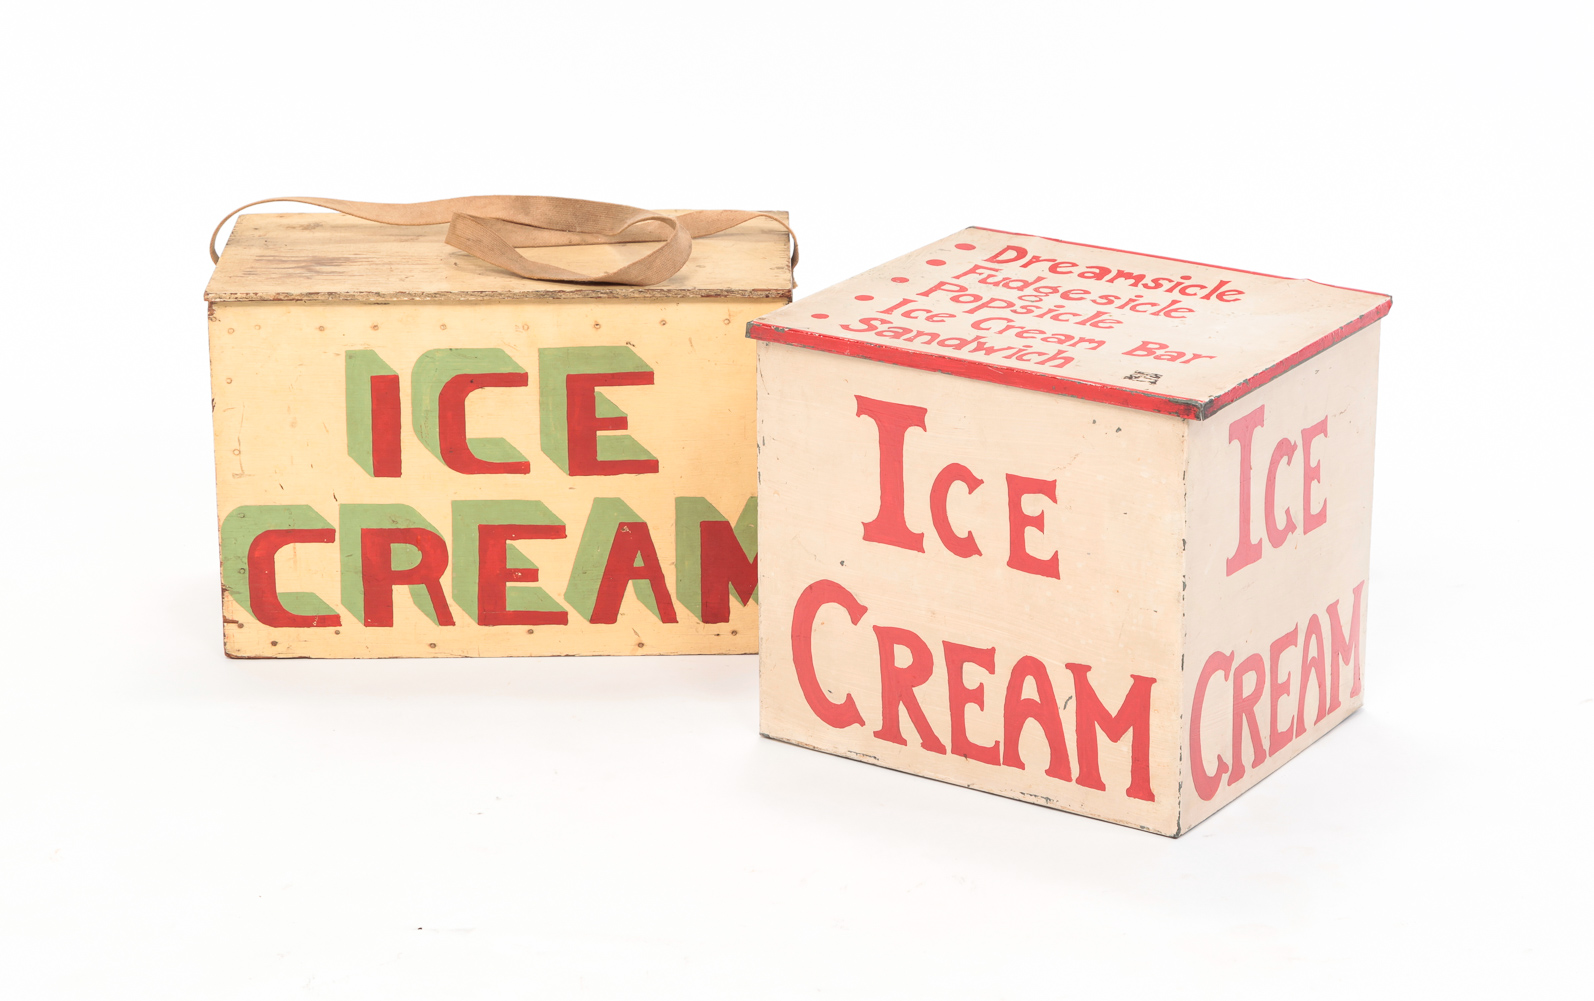 TWO AMERICAN ICE CREAM CHESTS. Mid 20th